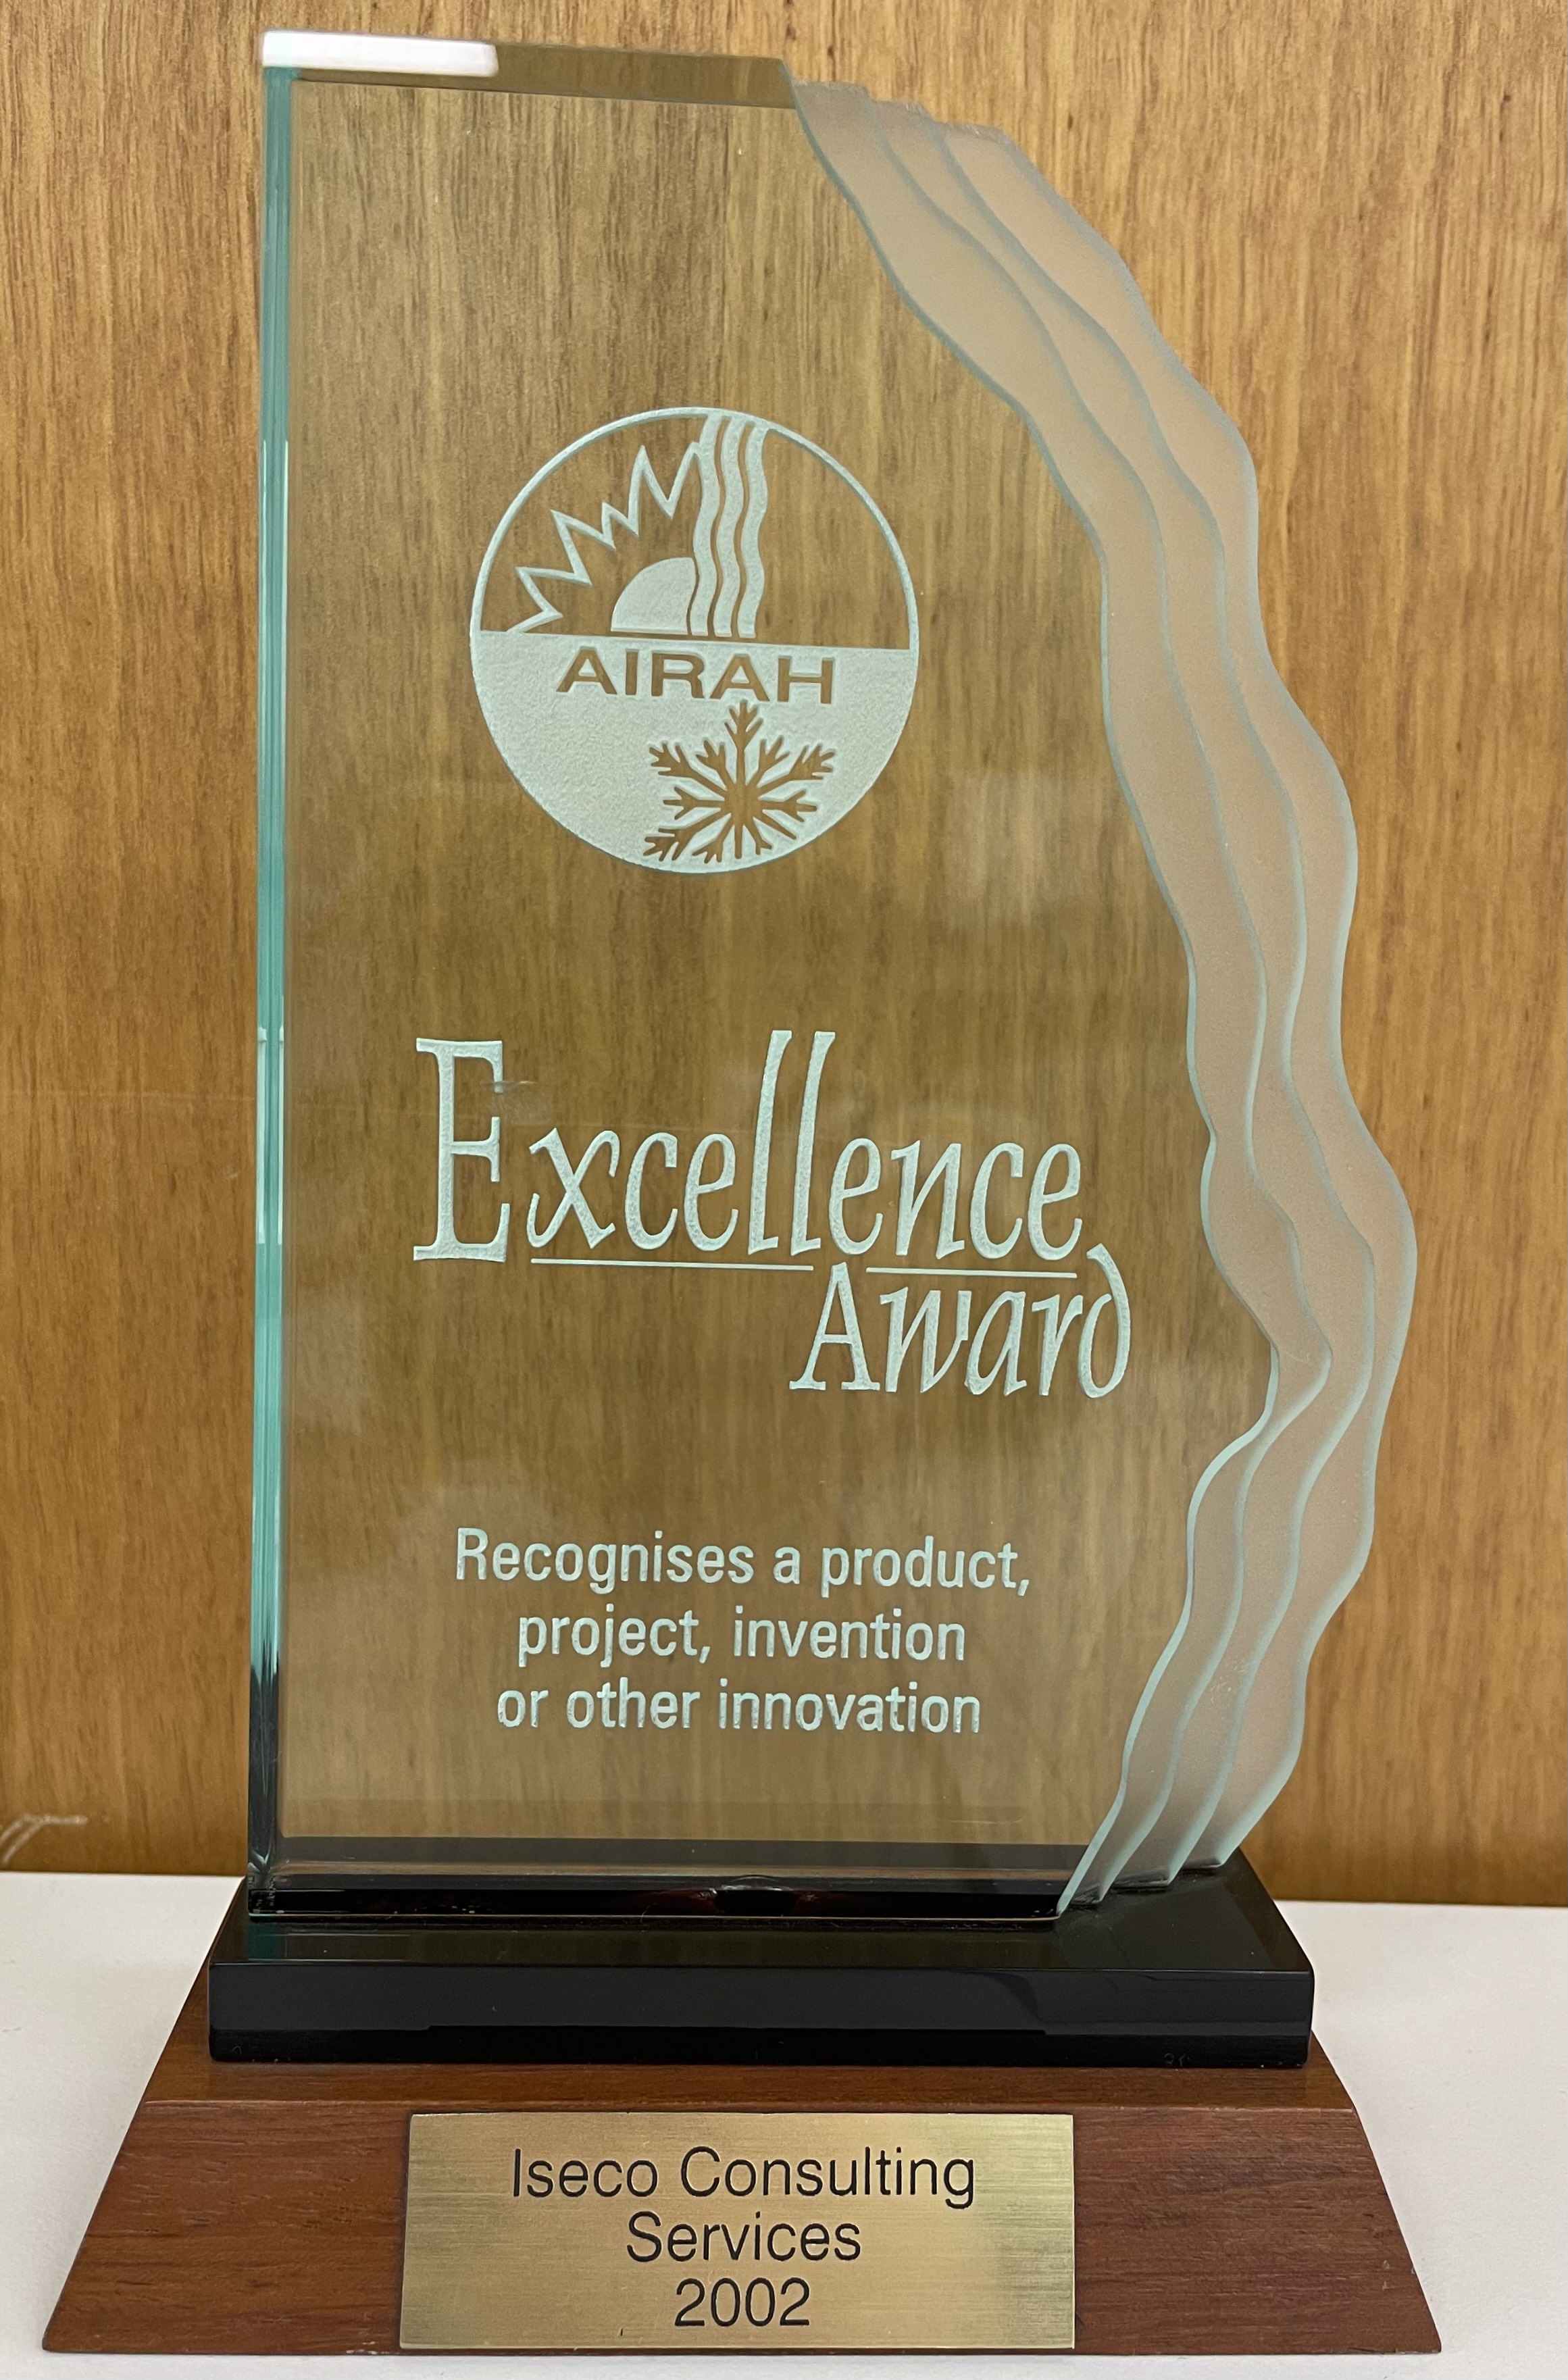 AIRAH Excellence Award awarded to ISECO in 2002